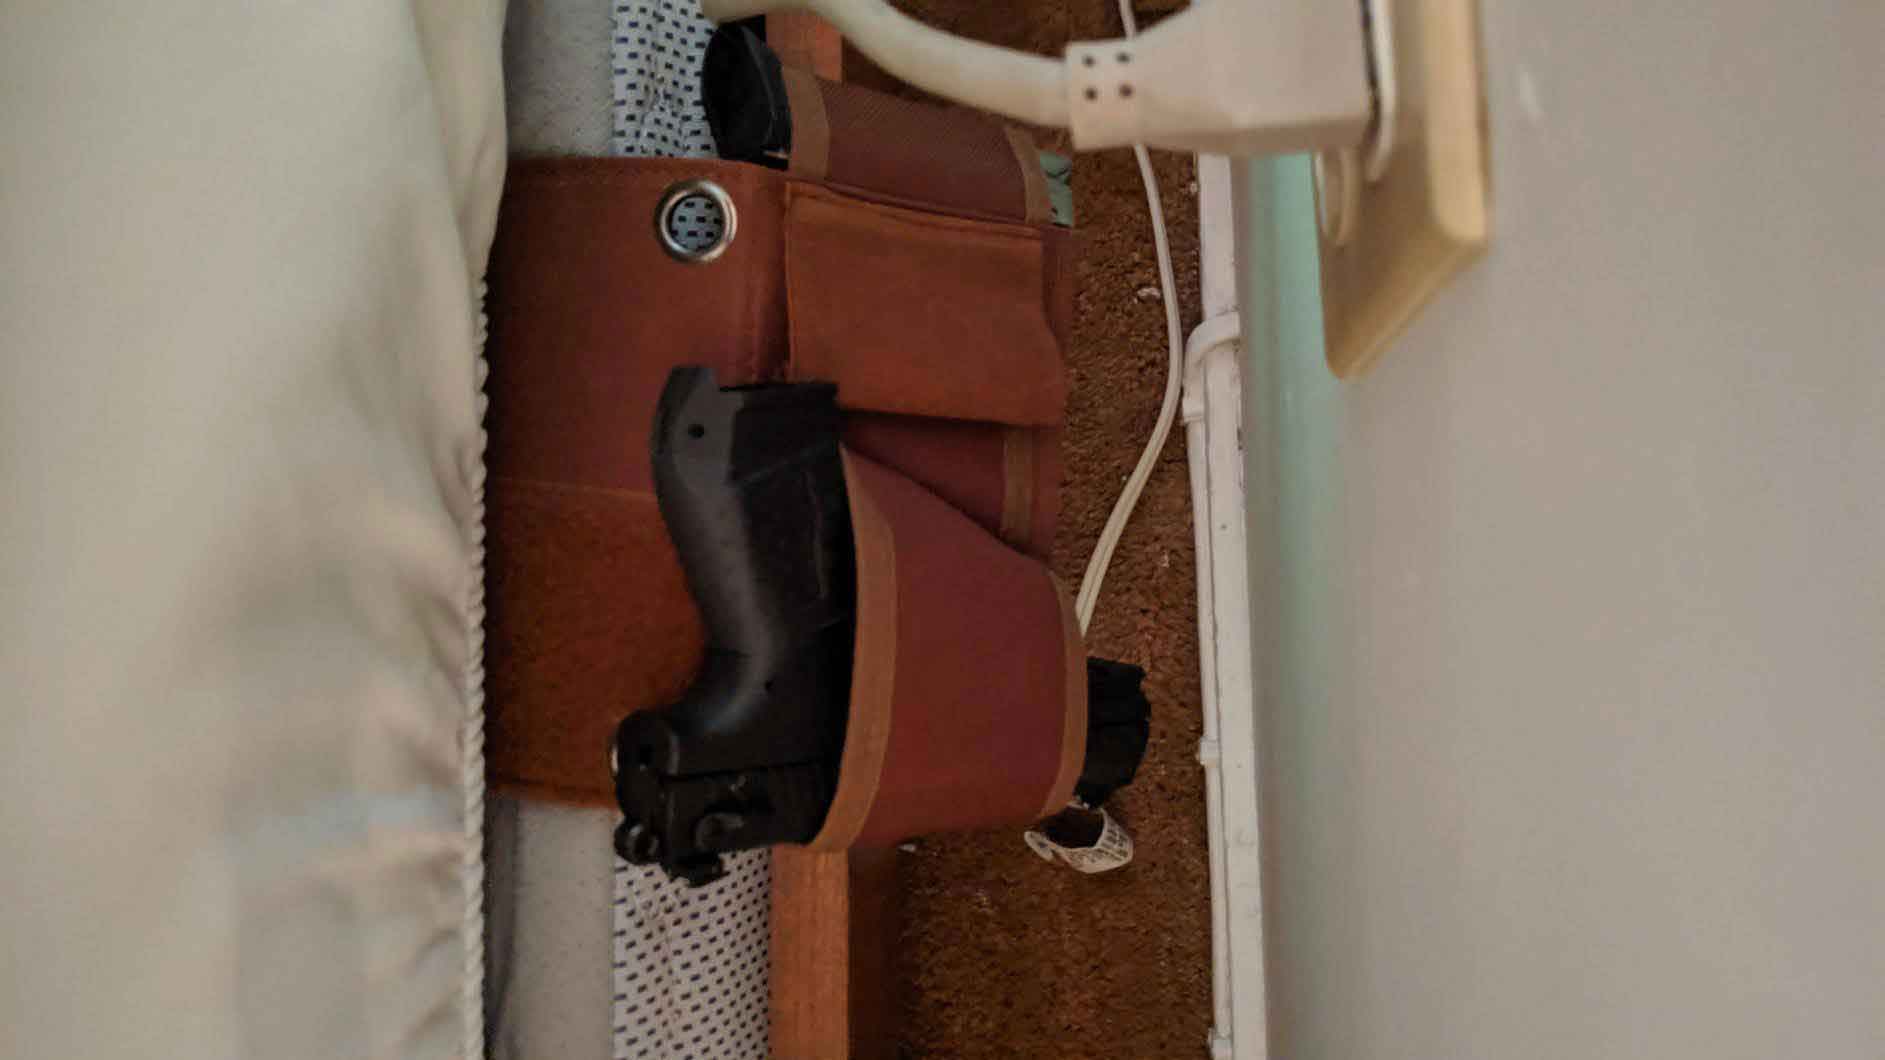 Dinosaurized | Morpheus bedside holster | Best bedside holster in America | Sticky & snug | Best holster for emergency |high quality material | space & time saving |Most needed holster when you sleep